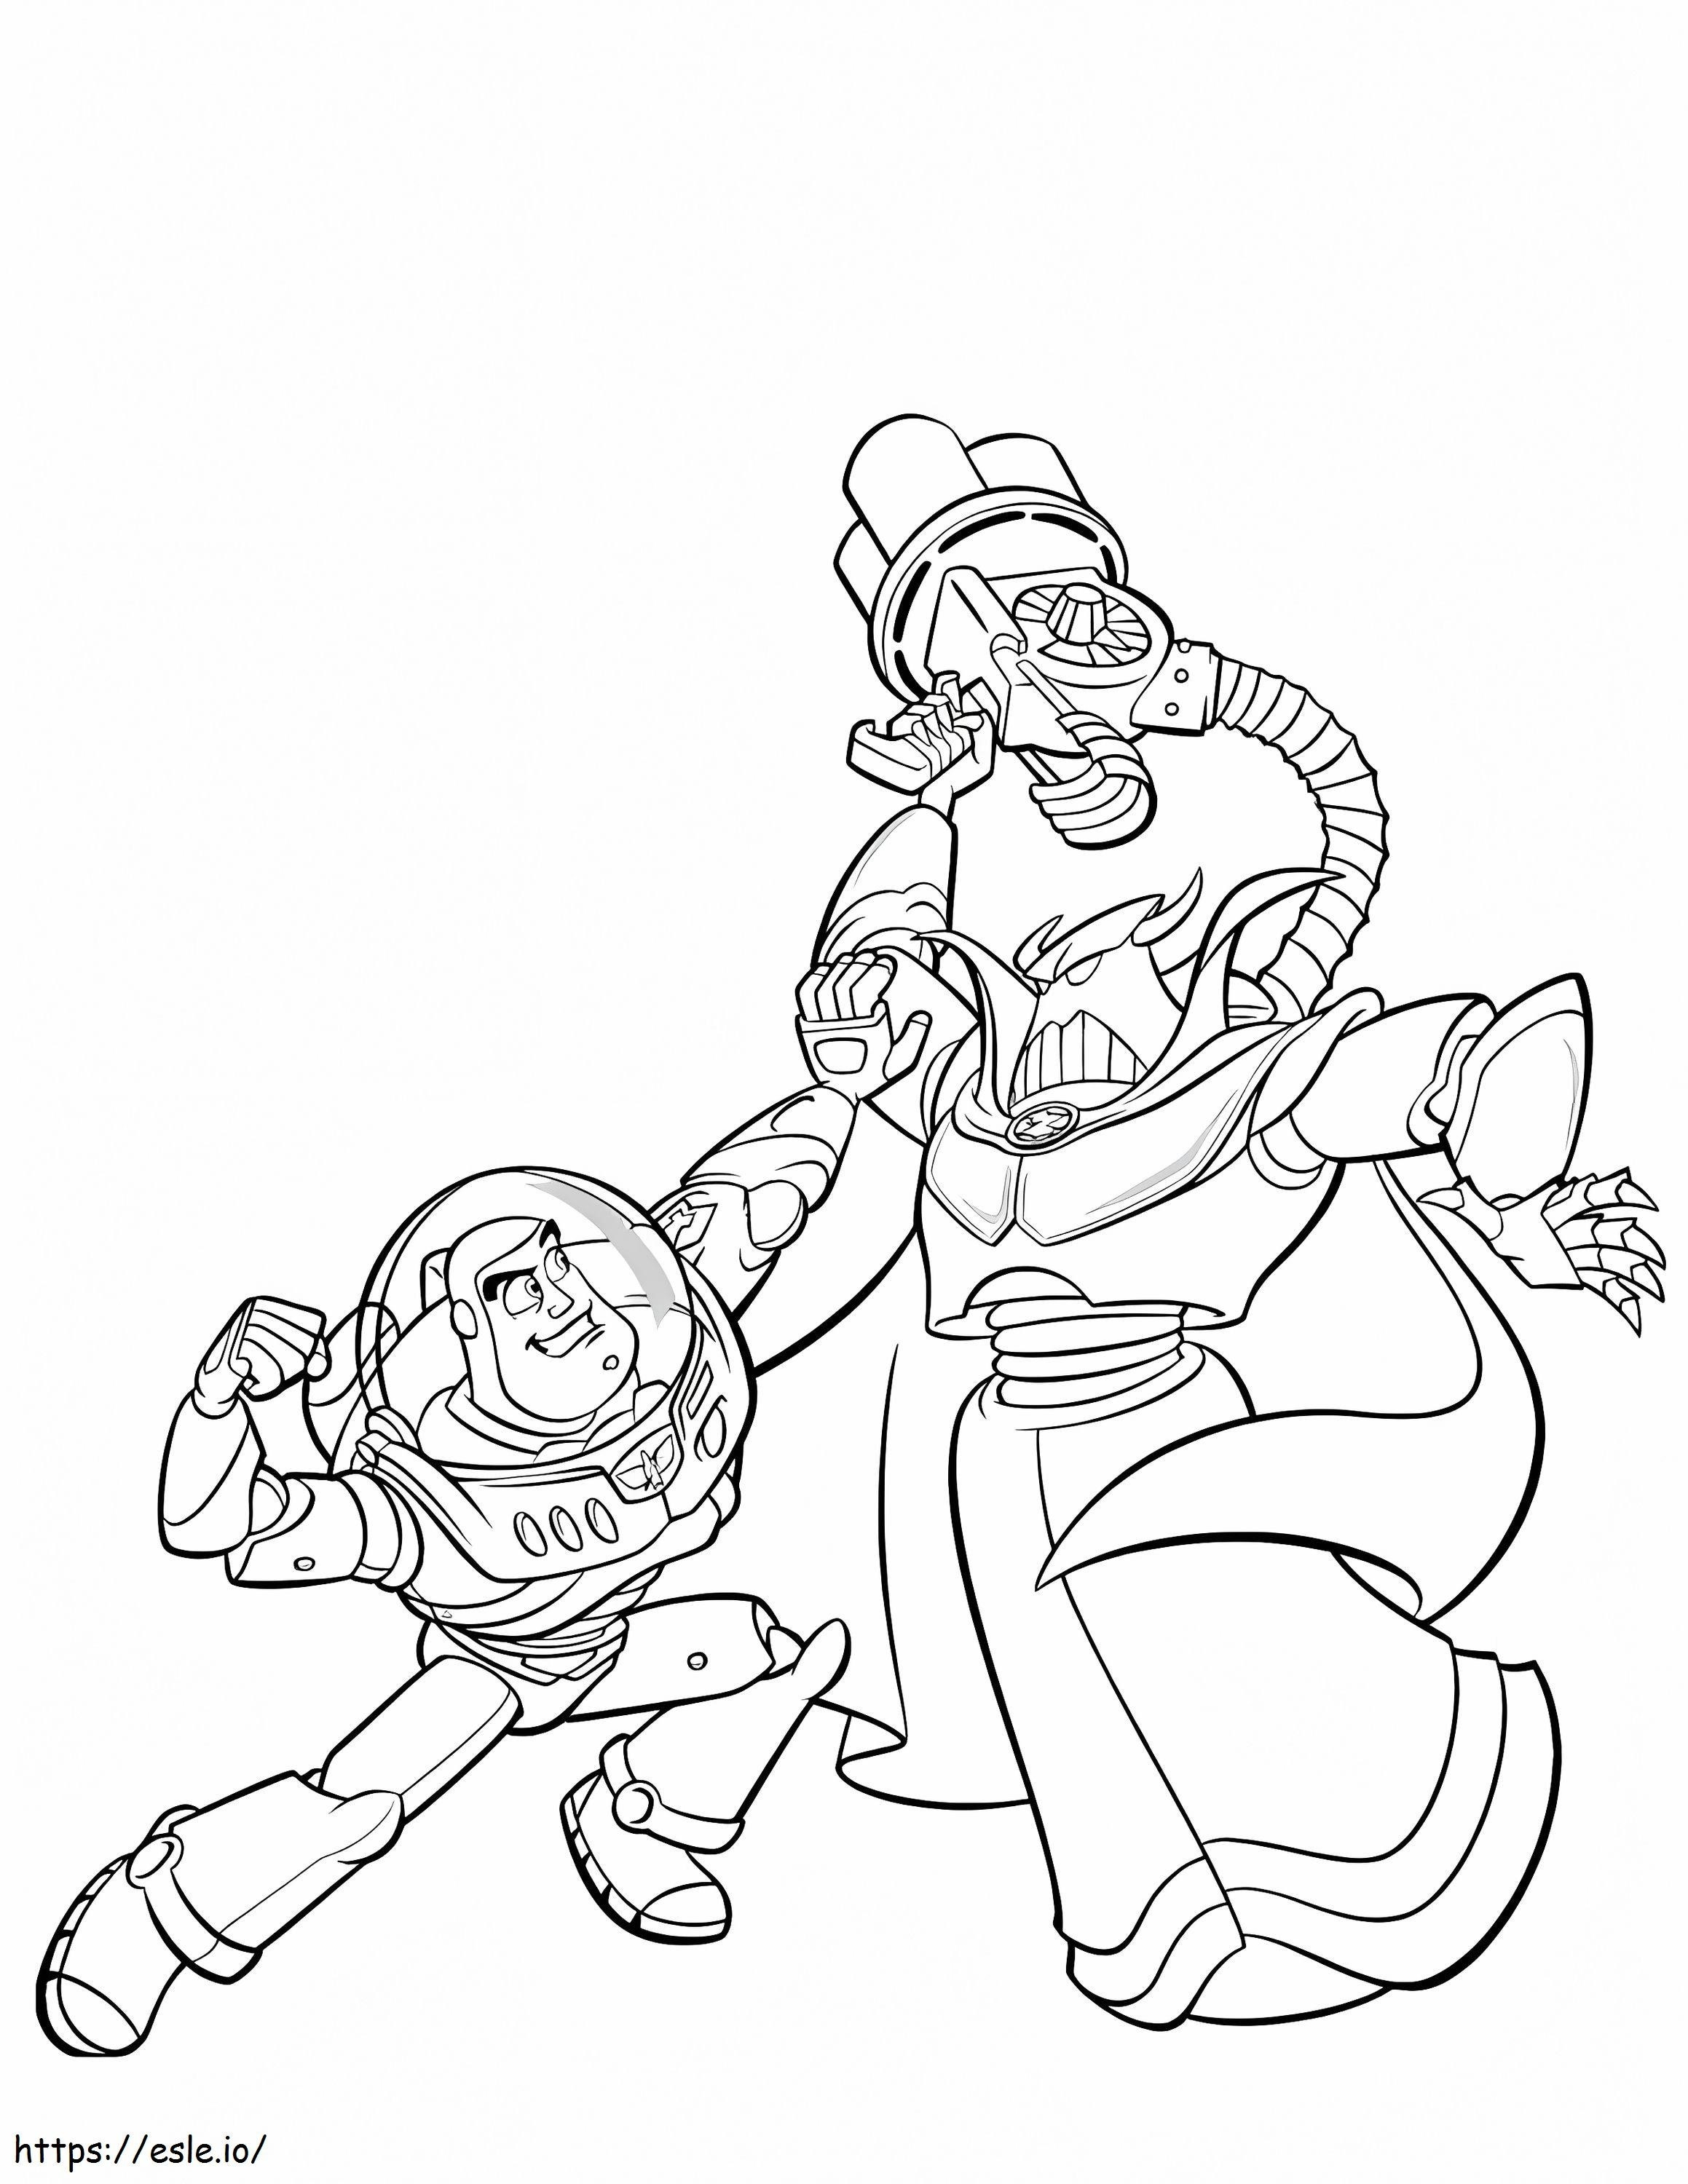 Buzz Lightyear Vs Monstruo coloring page